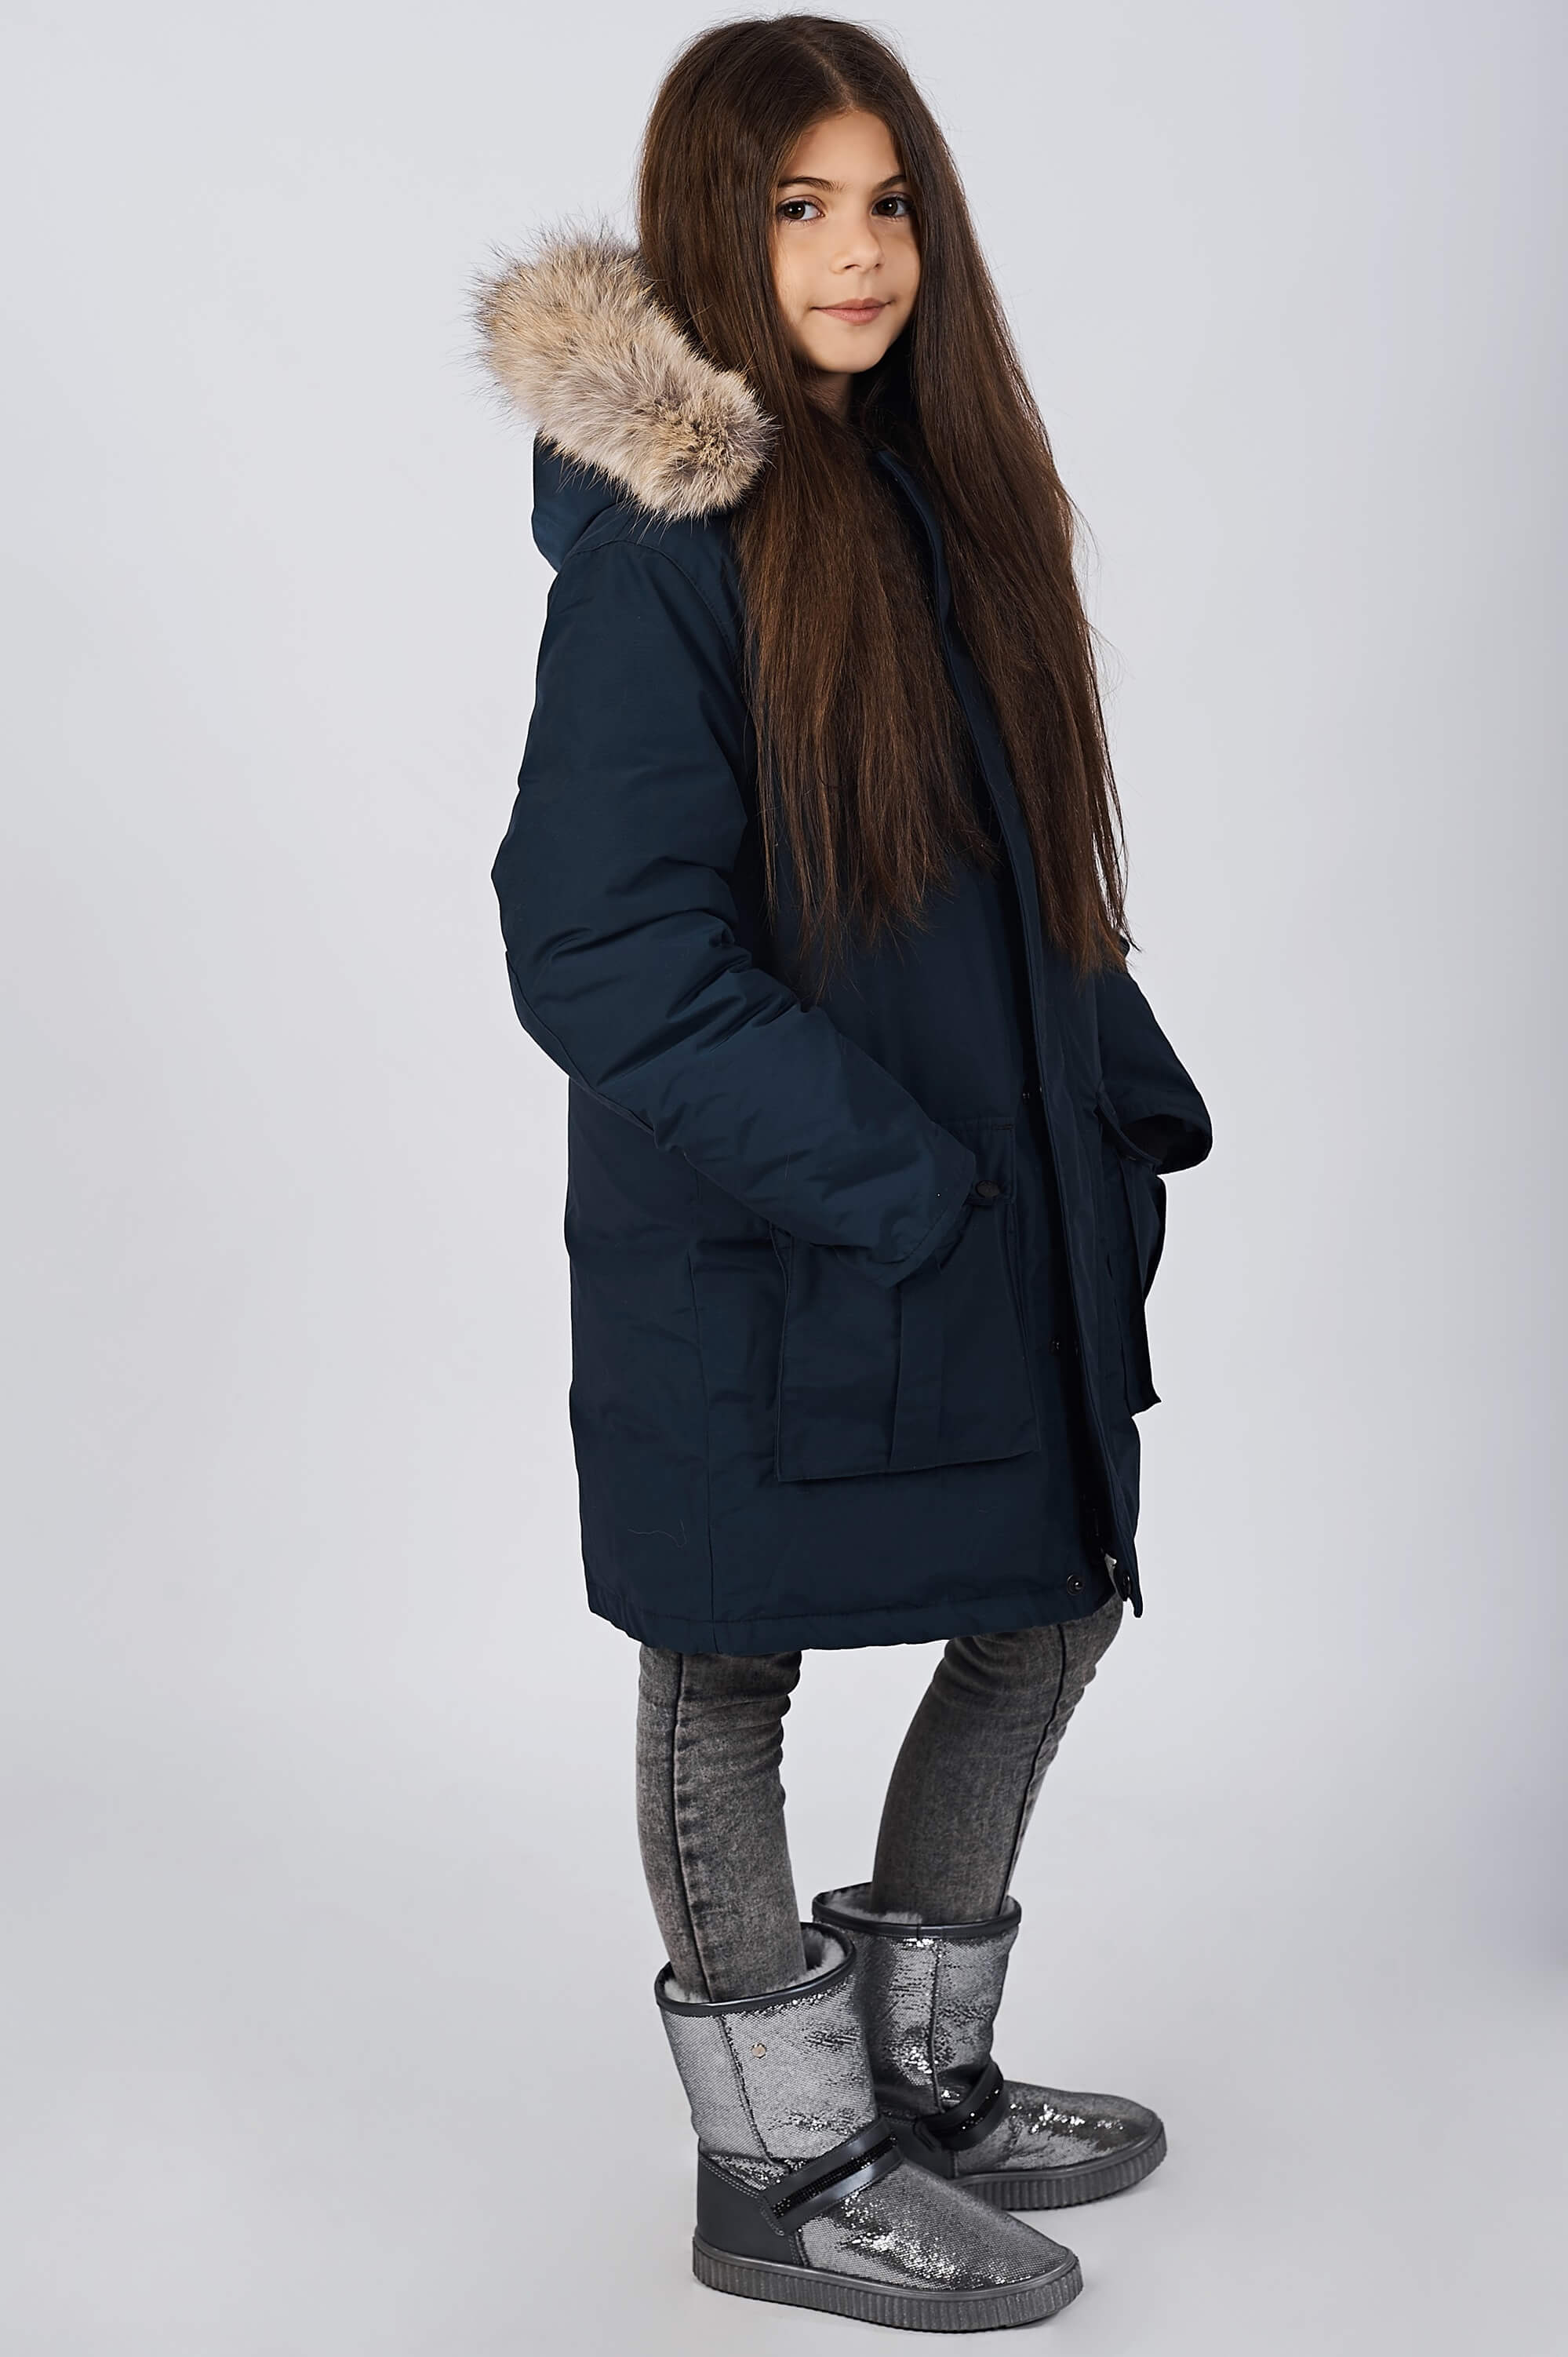 Rocky Parka for Kids | Kid's Down Parkas and Winter Coats - Arctic Bay